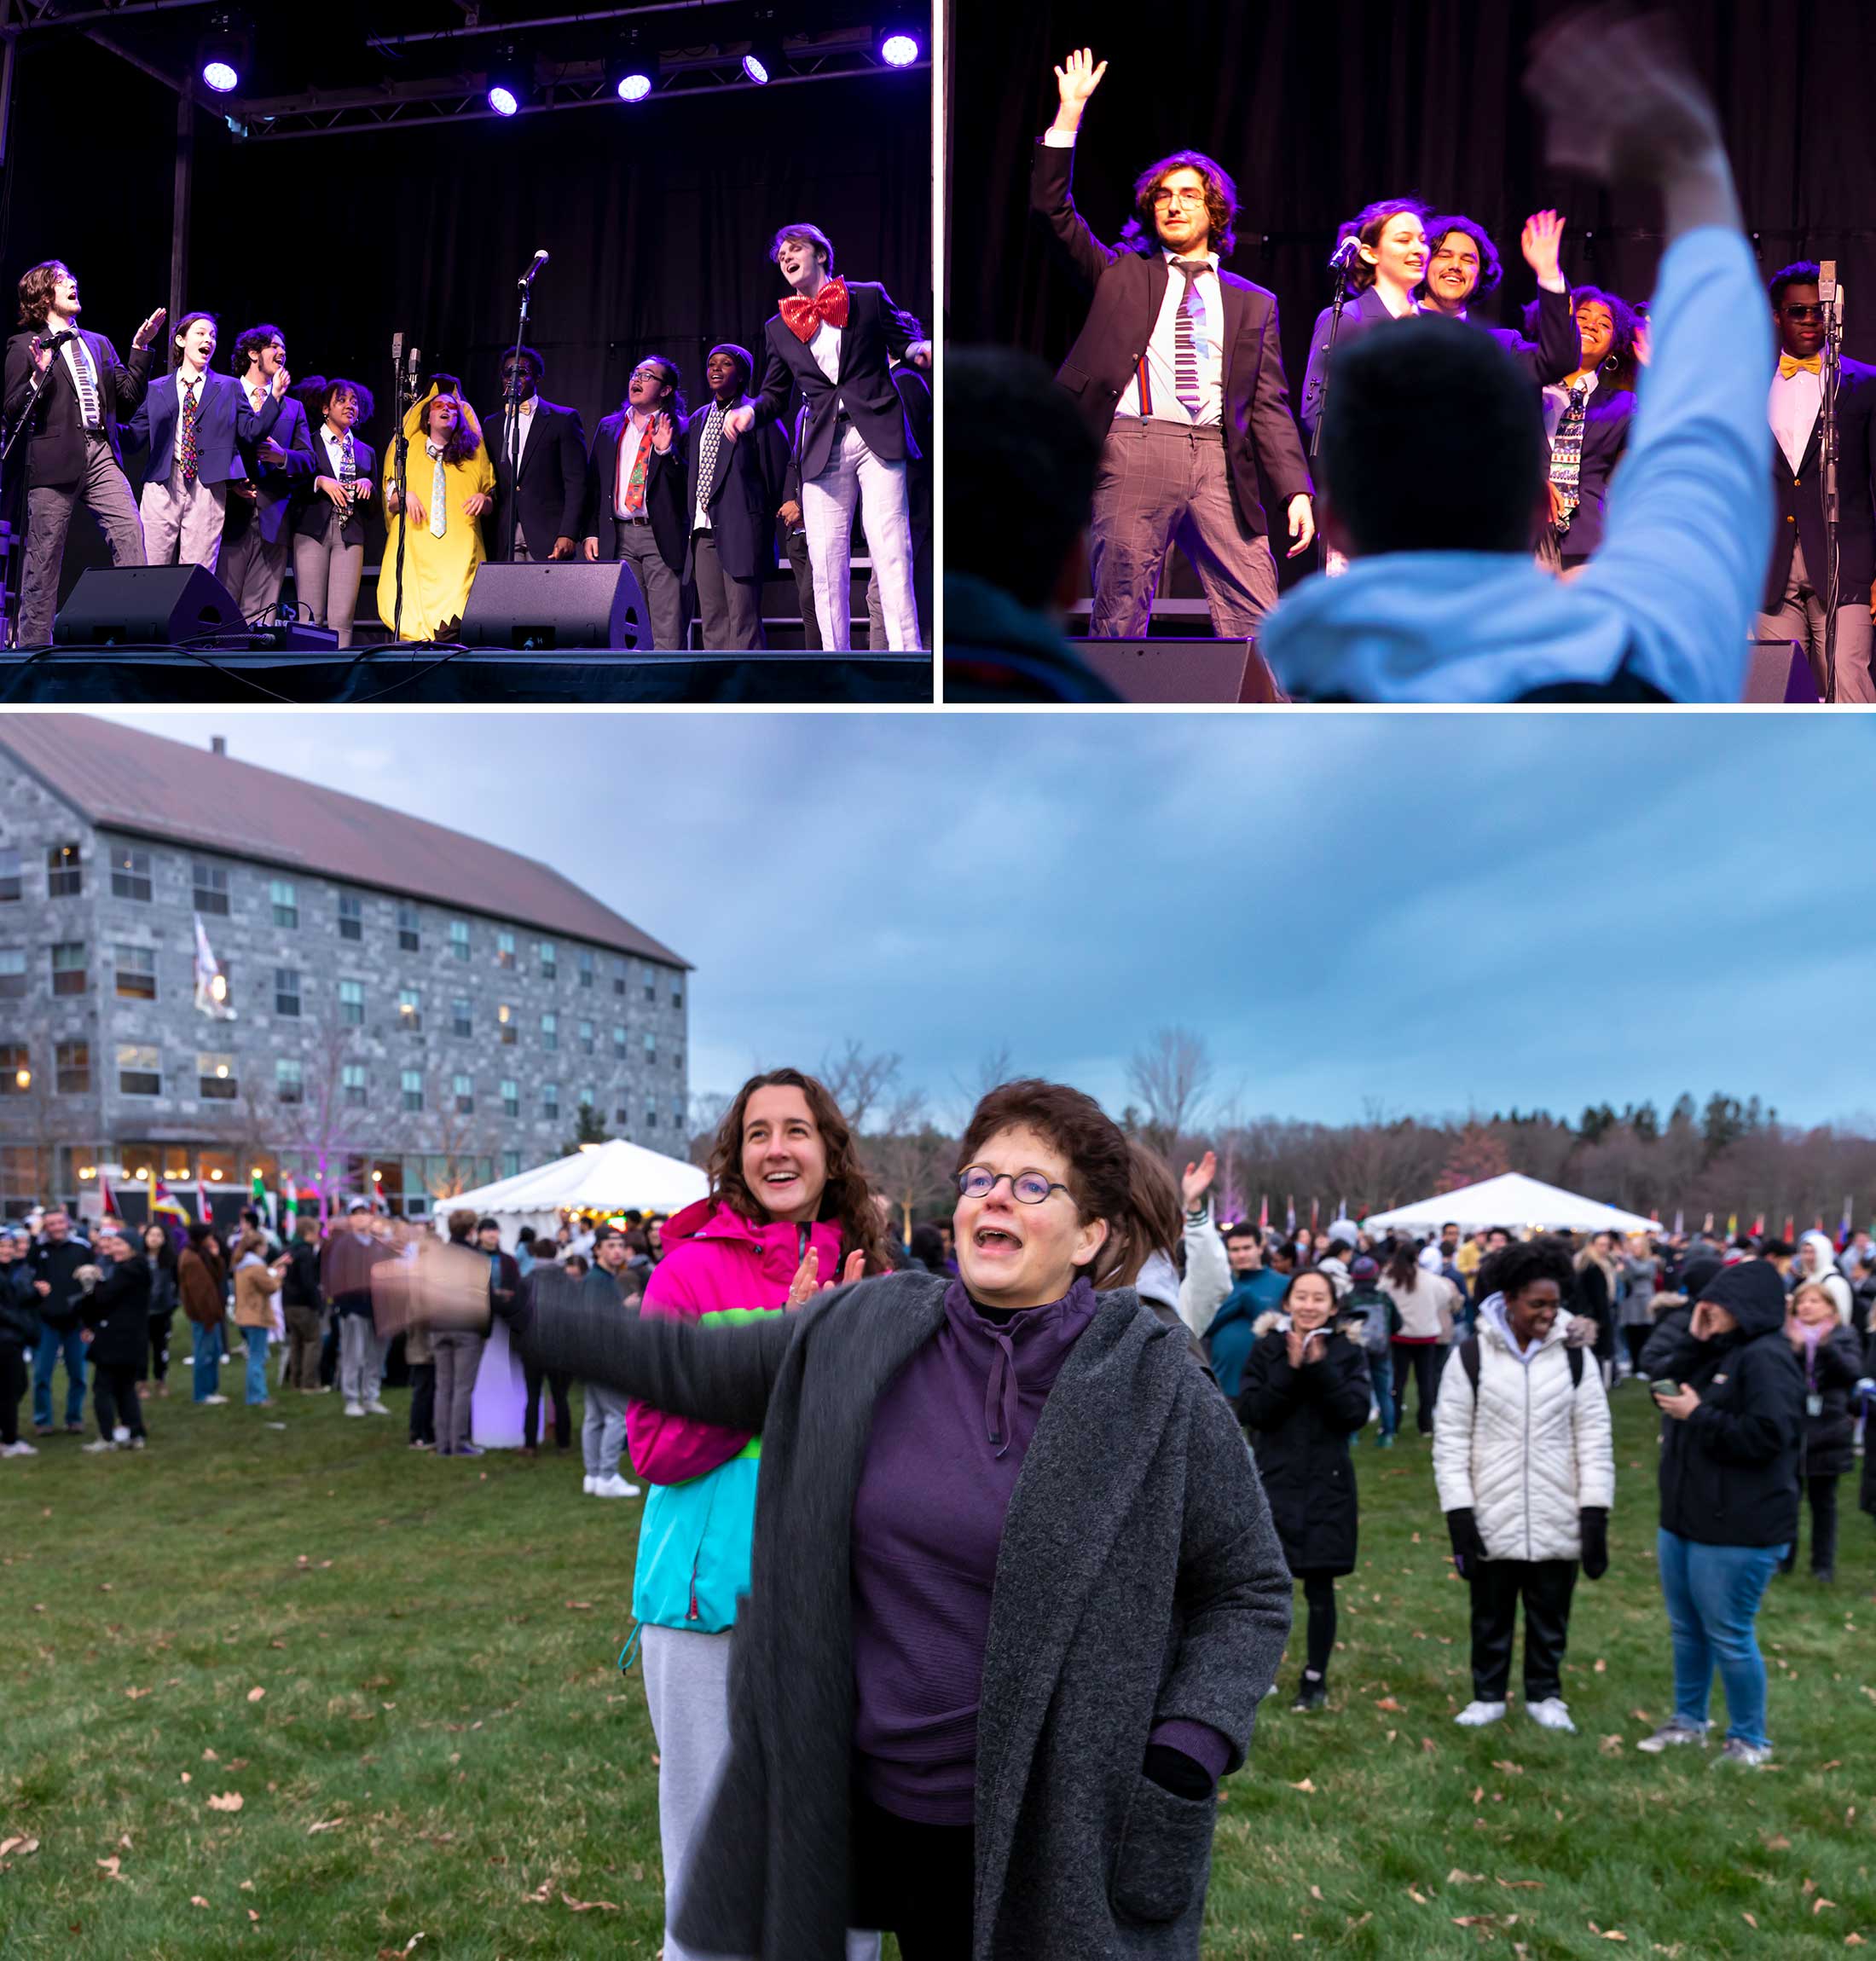 President Biddy Martin reacts to the Zumbyes musical performance.